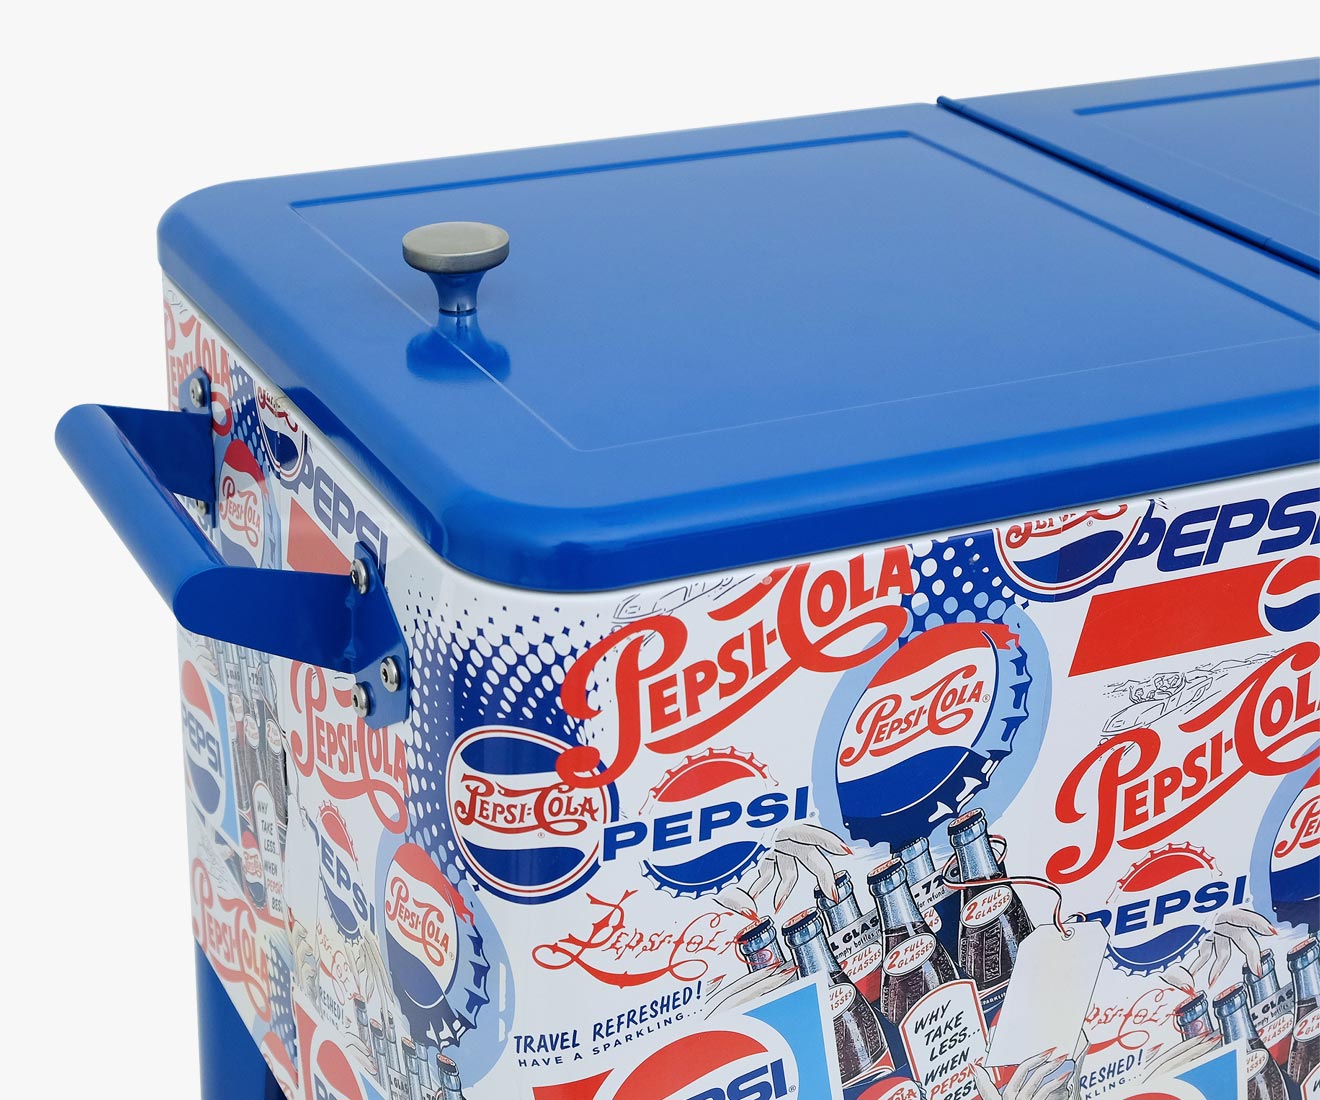 Pepsi 80-Quart Officially Licensed Patio Cooler by Permasteel Product Features Image 4